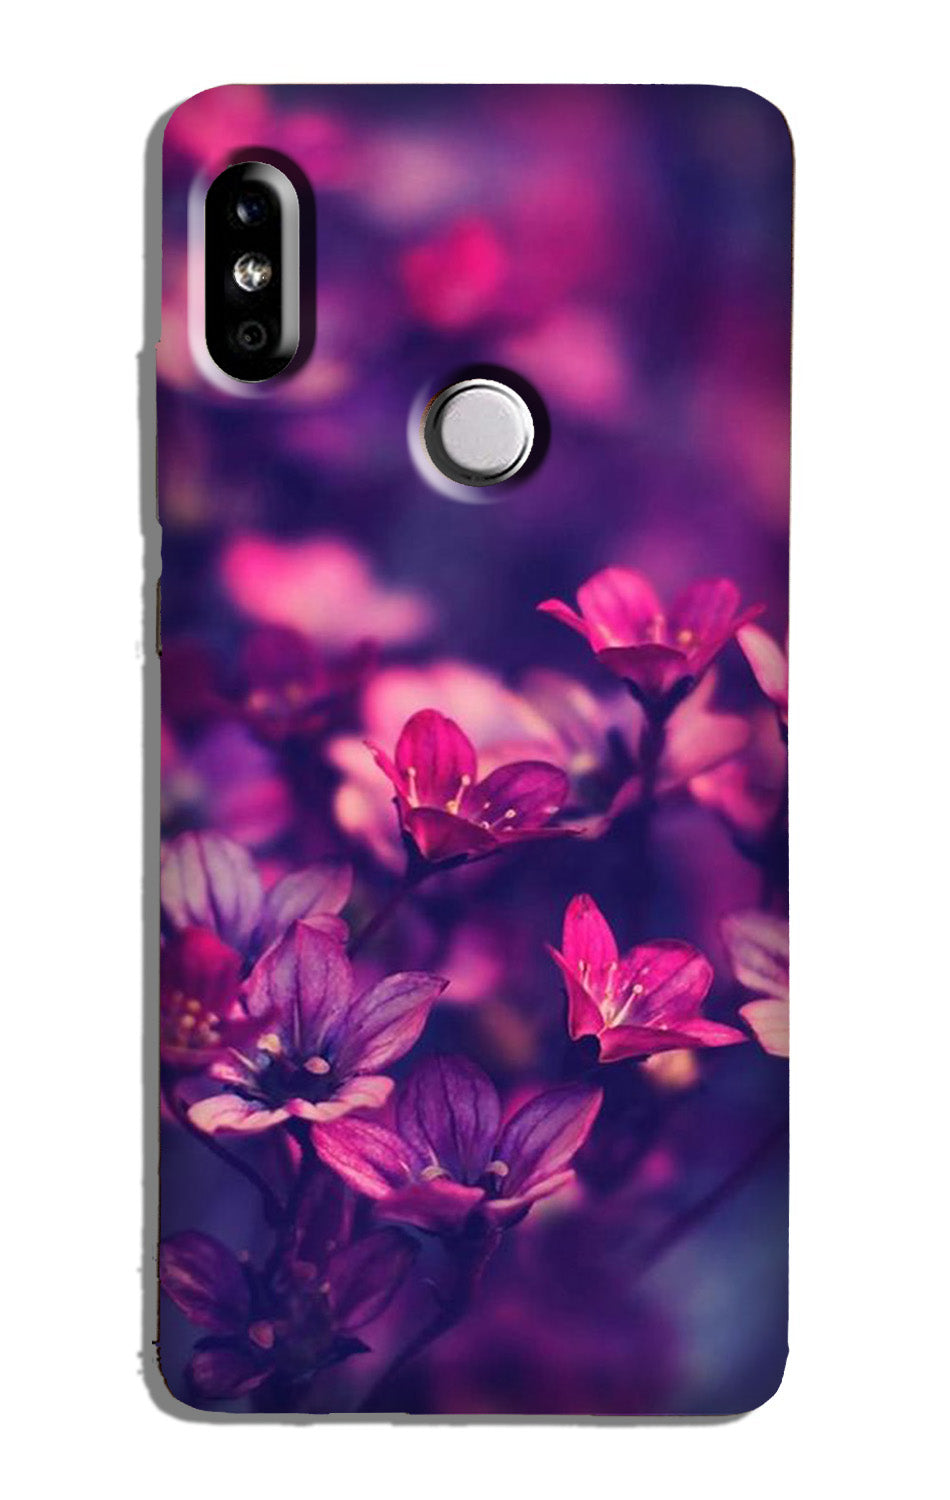 flowers Case for Redmi 6 Pro